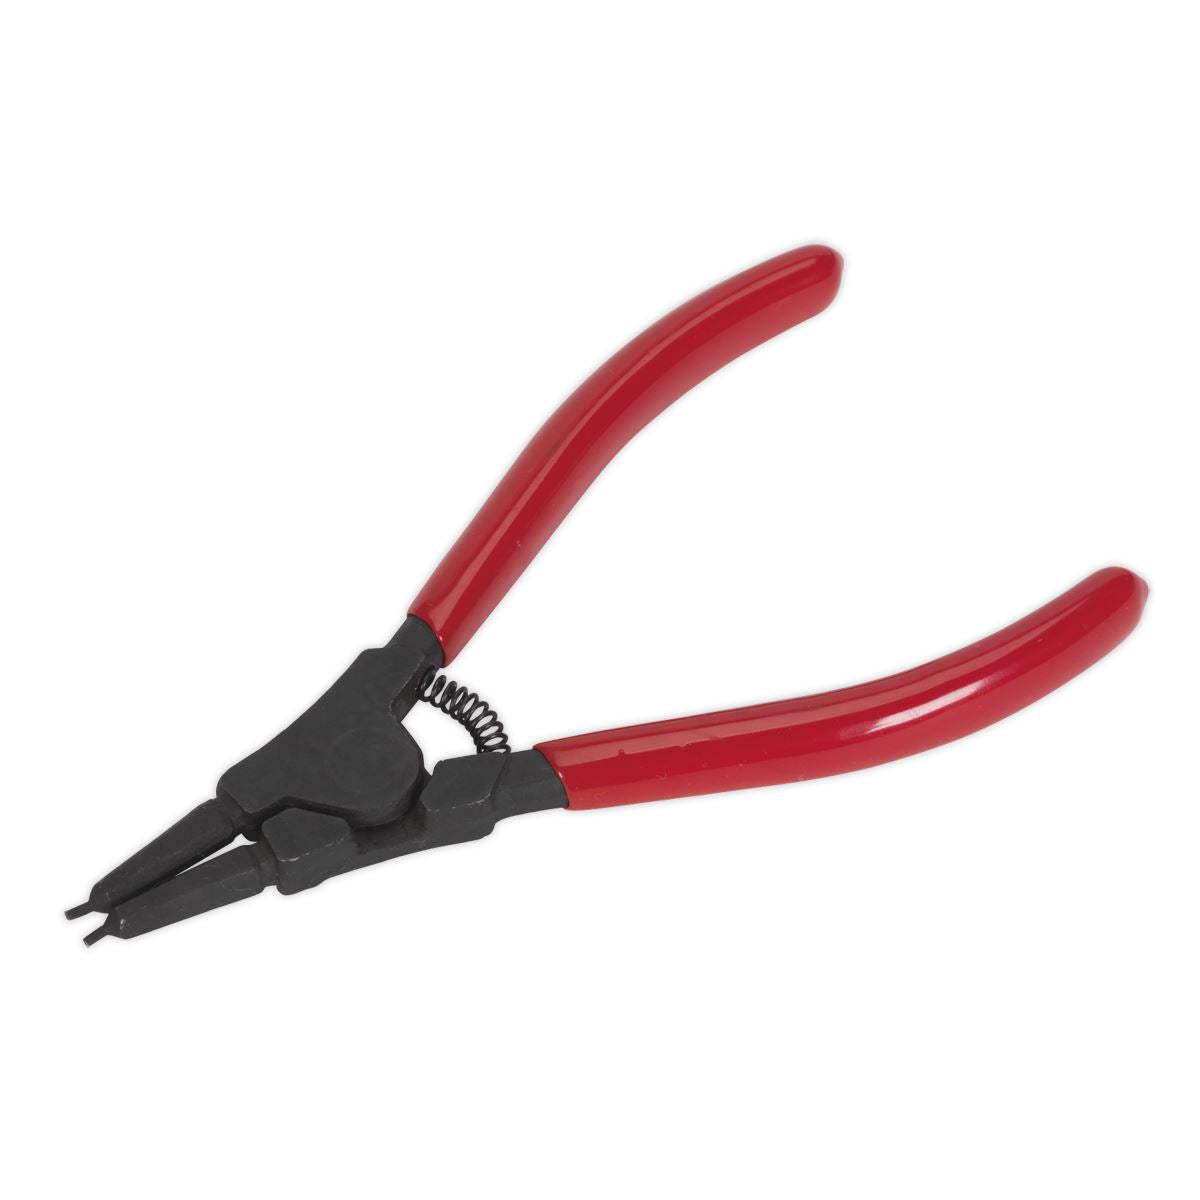 Sealey Premier Circlip Pliers External Straight Nose 140mm